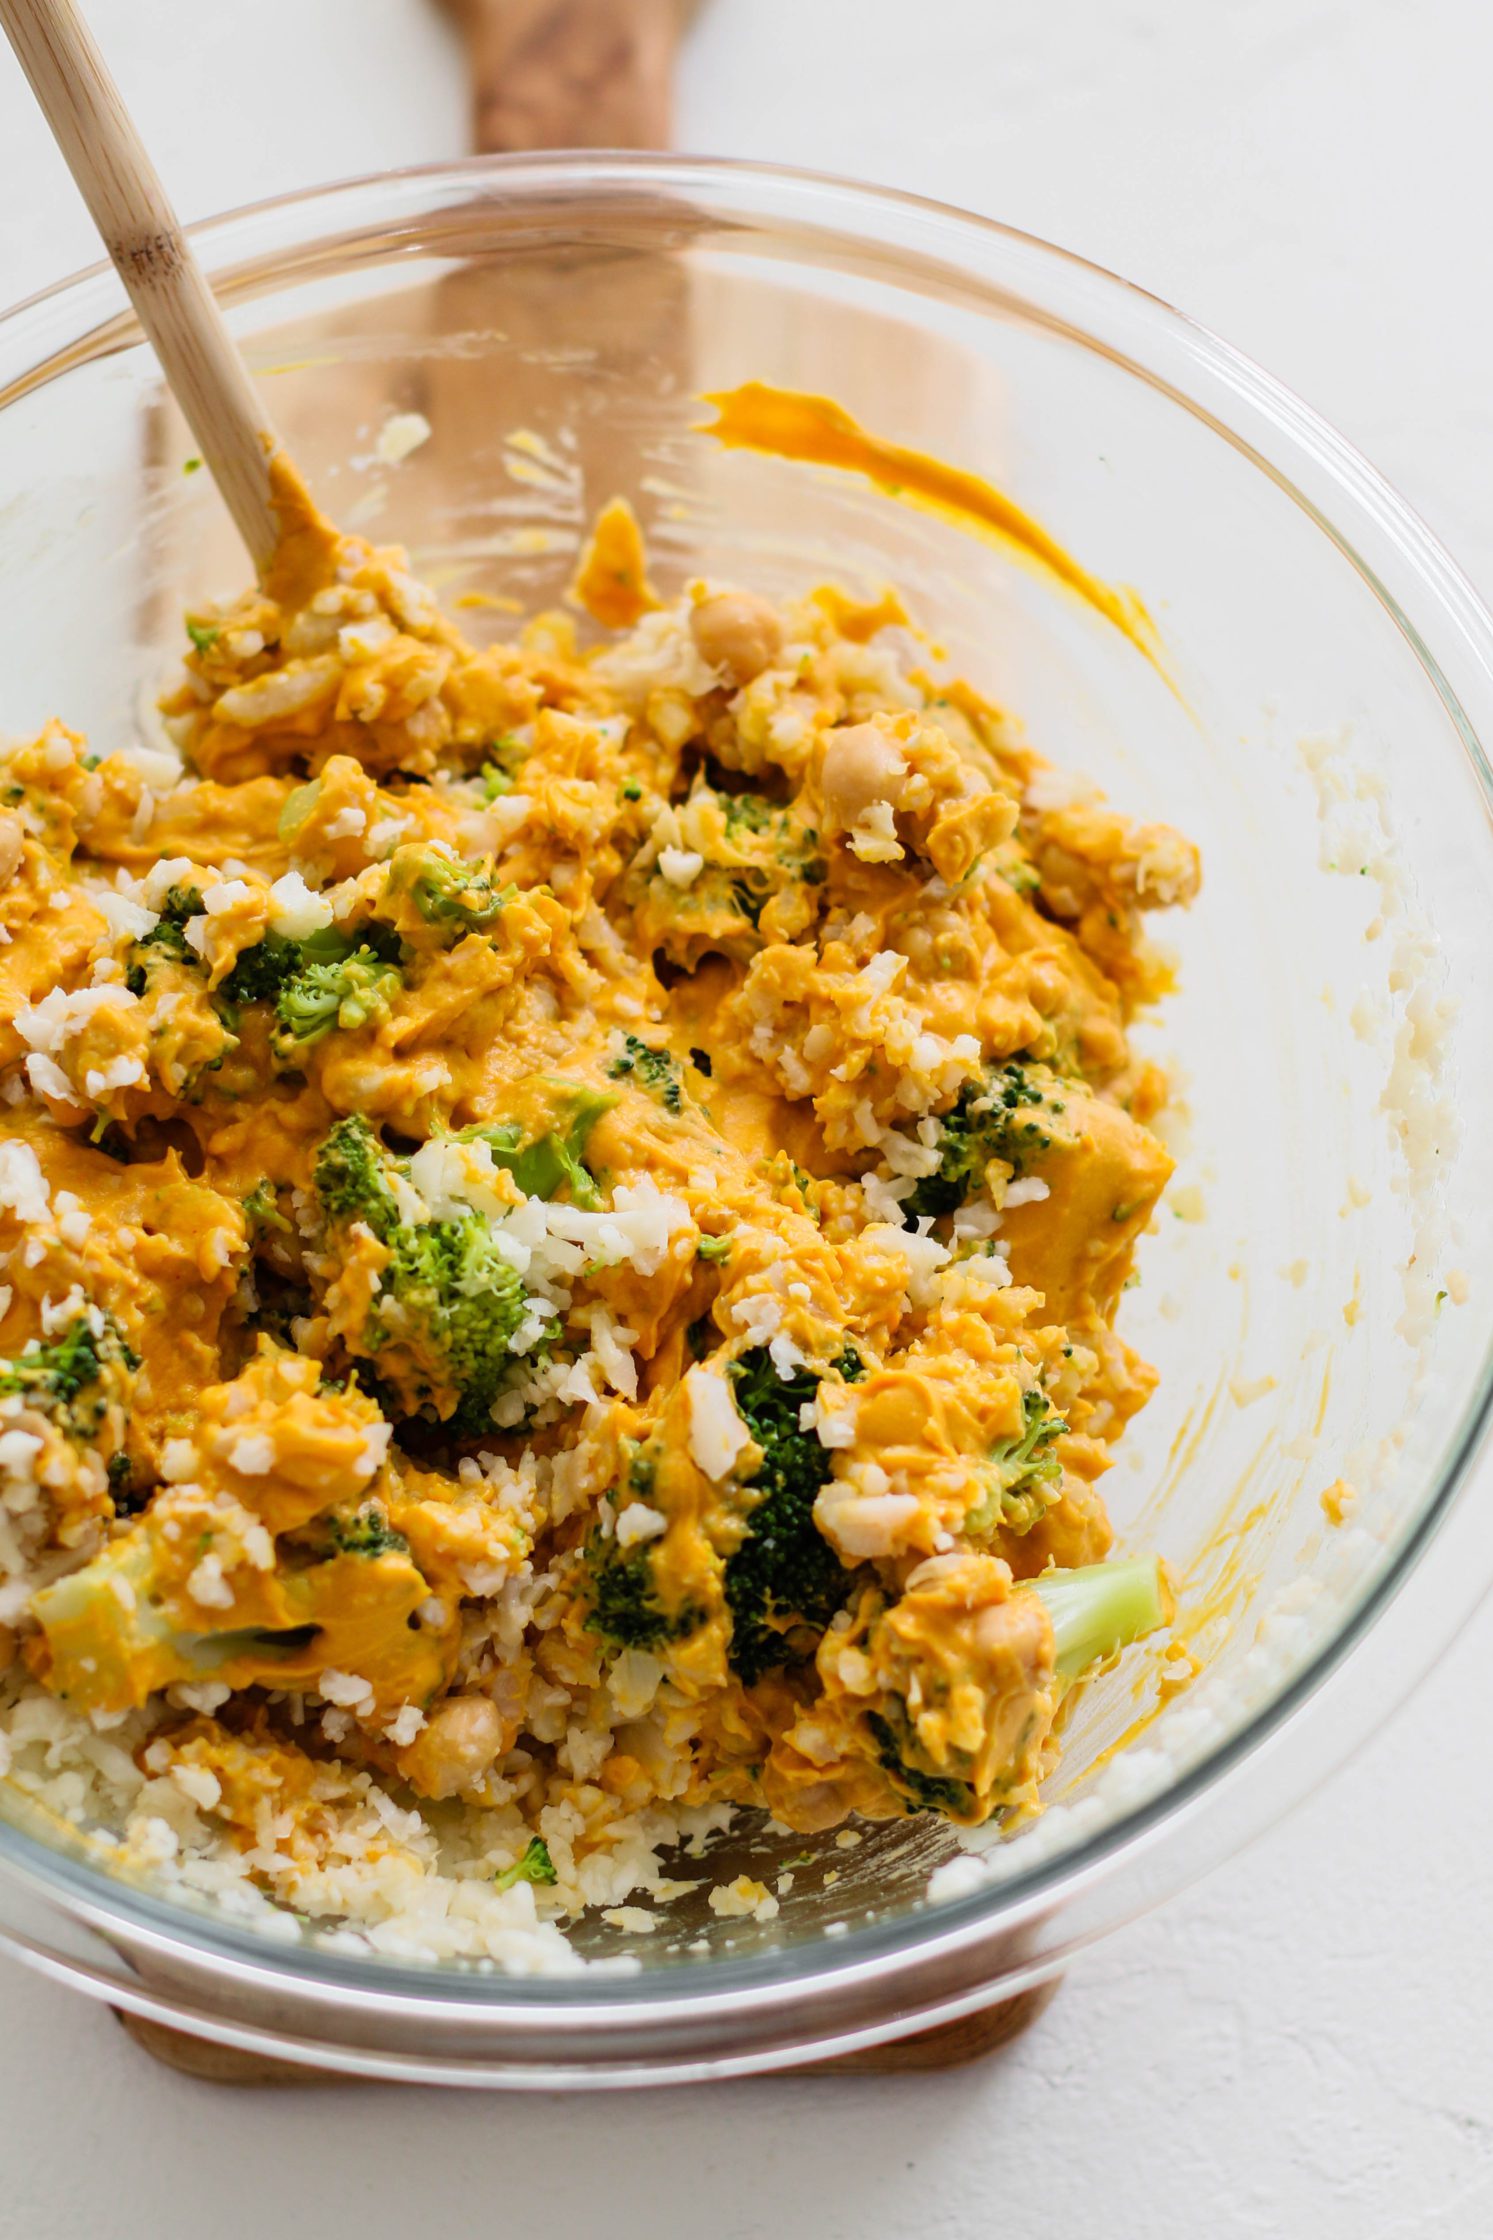 “Cheezy” Chickpea & Broccoli Casserole mixture in bowl with wooden spoon by Flora & Vino